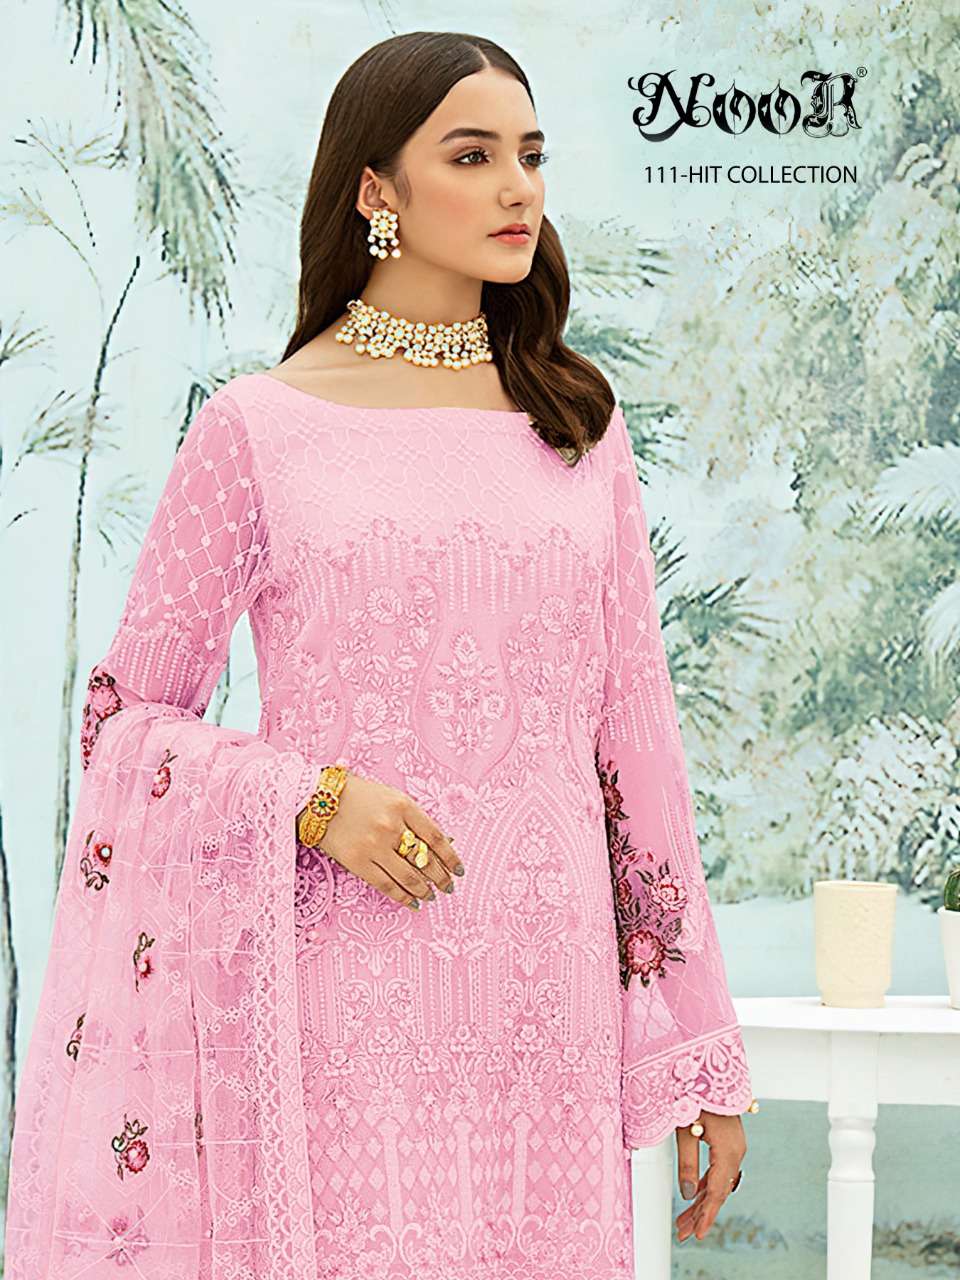 Noor 111 Hit Collection Georgette Heavy Embroidery suit